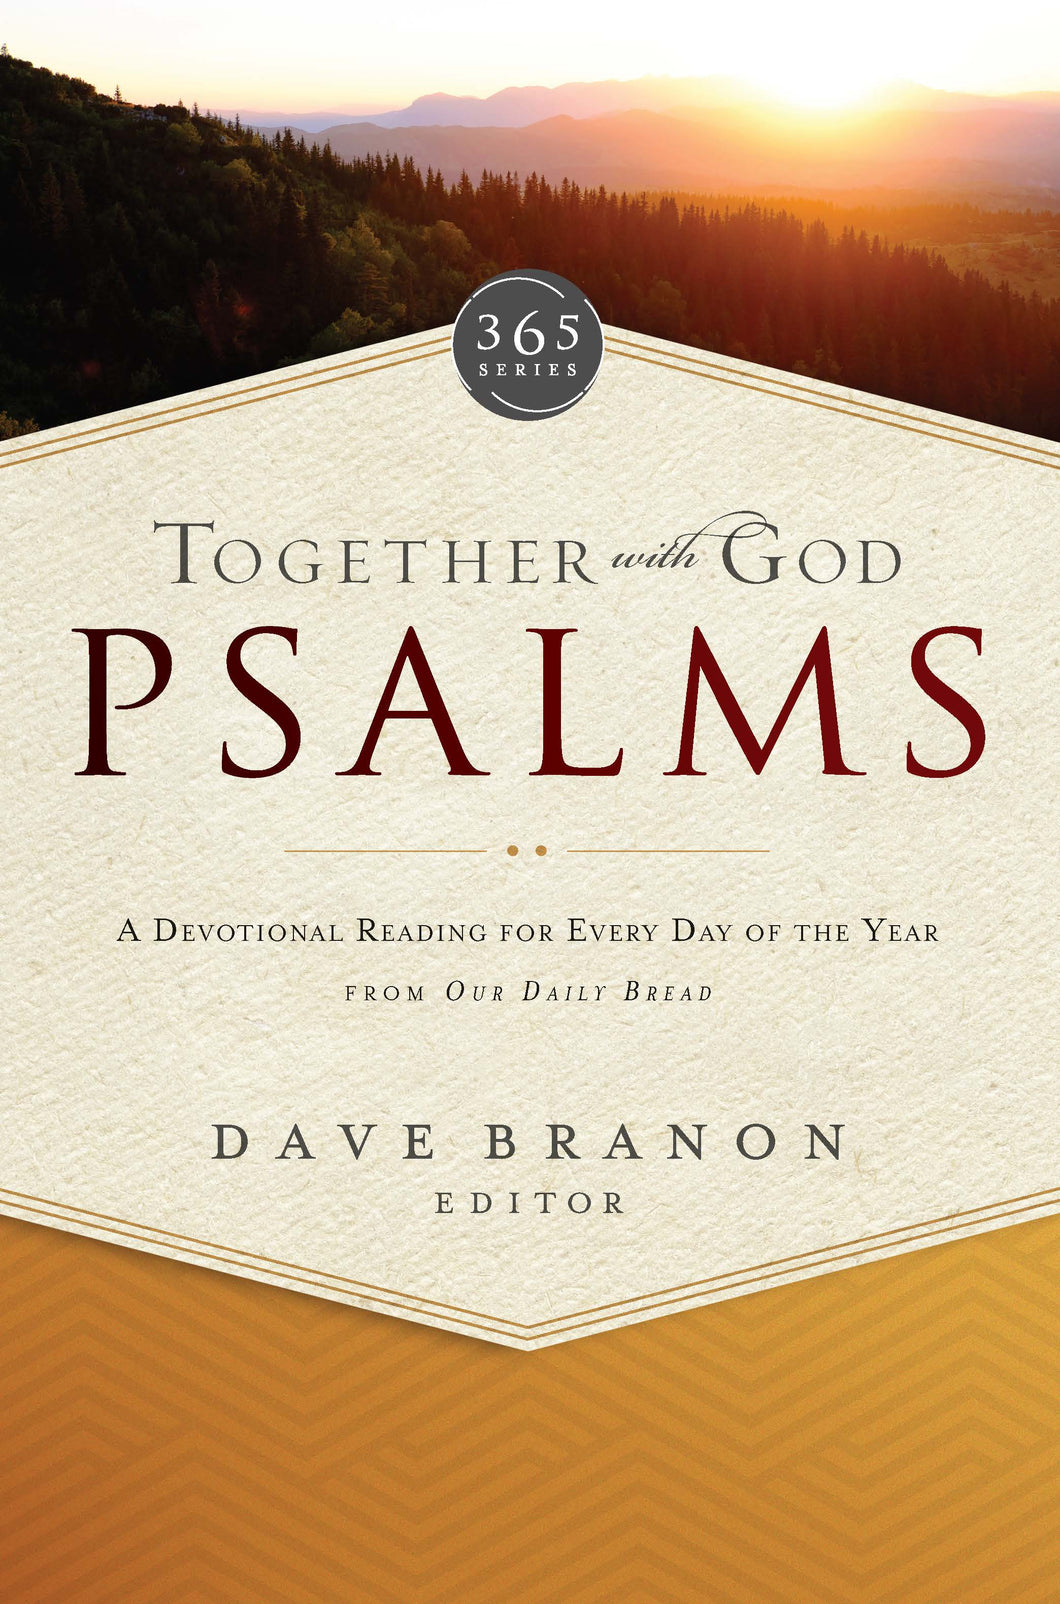 Together with God: Psalms [E-book]